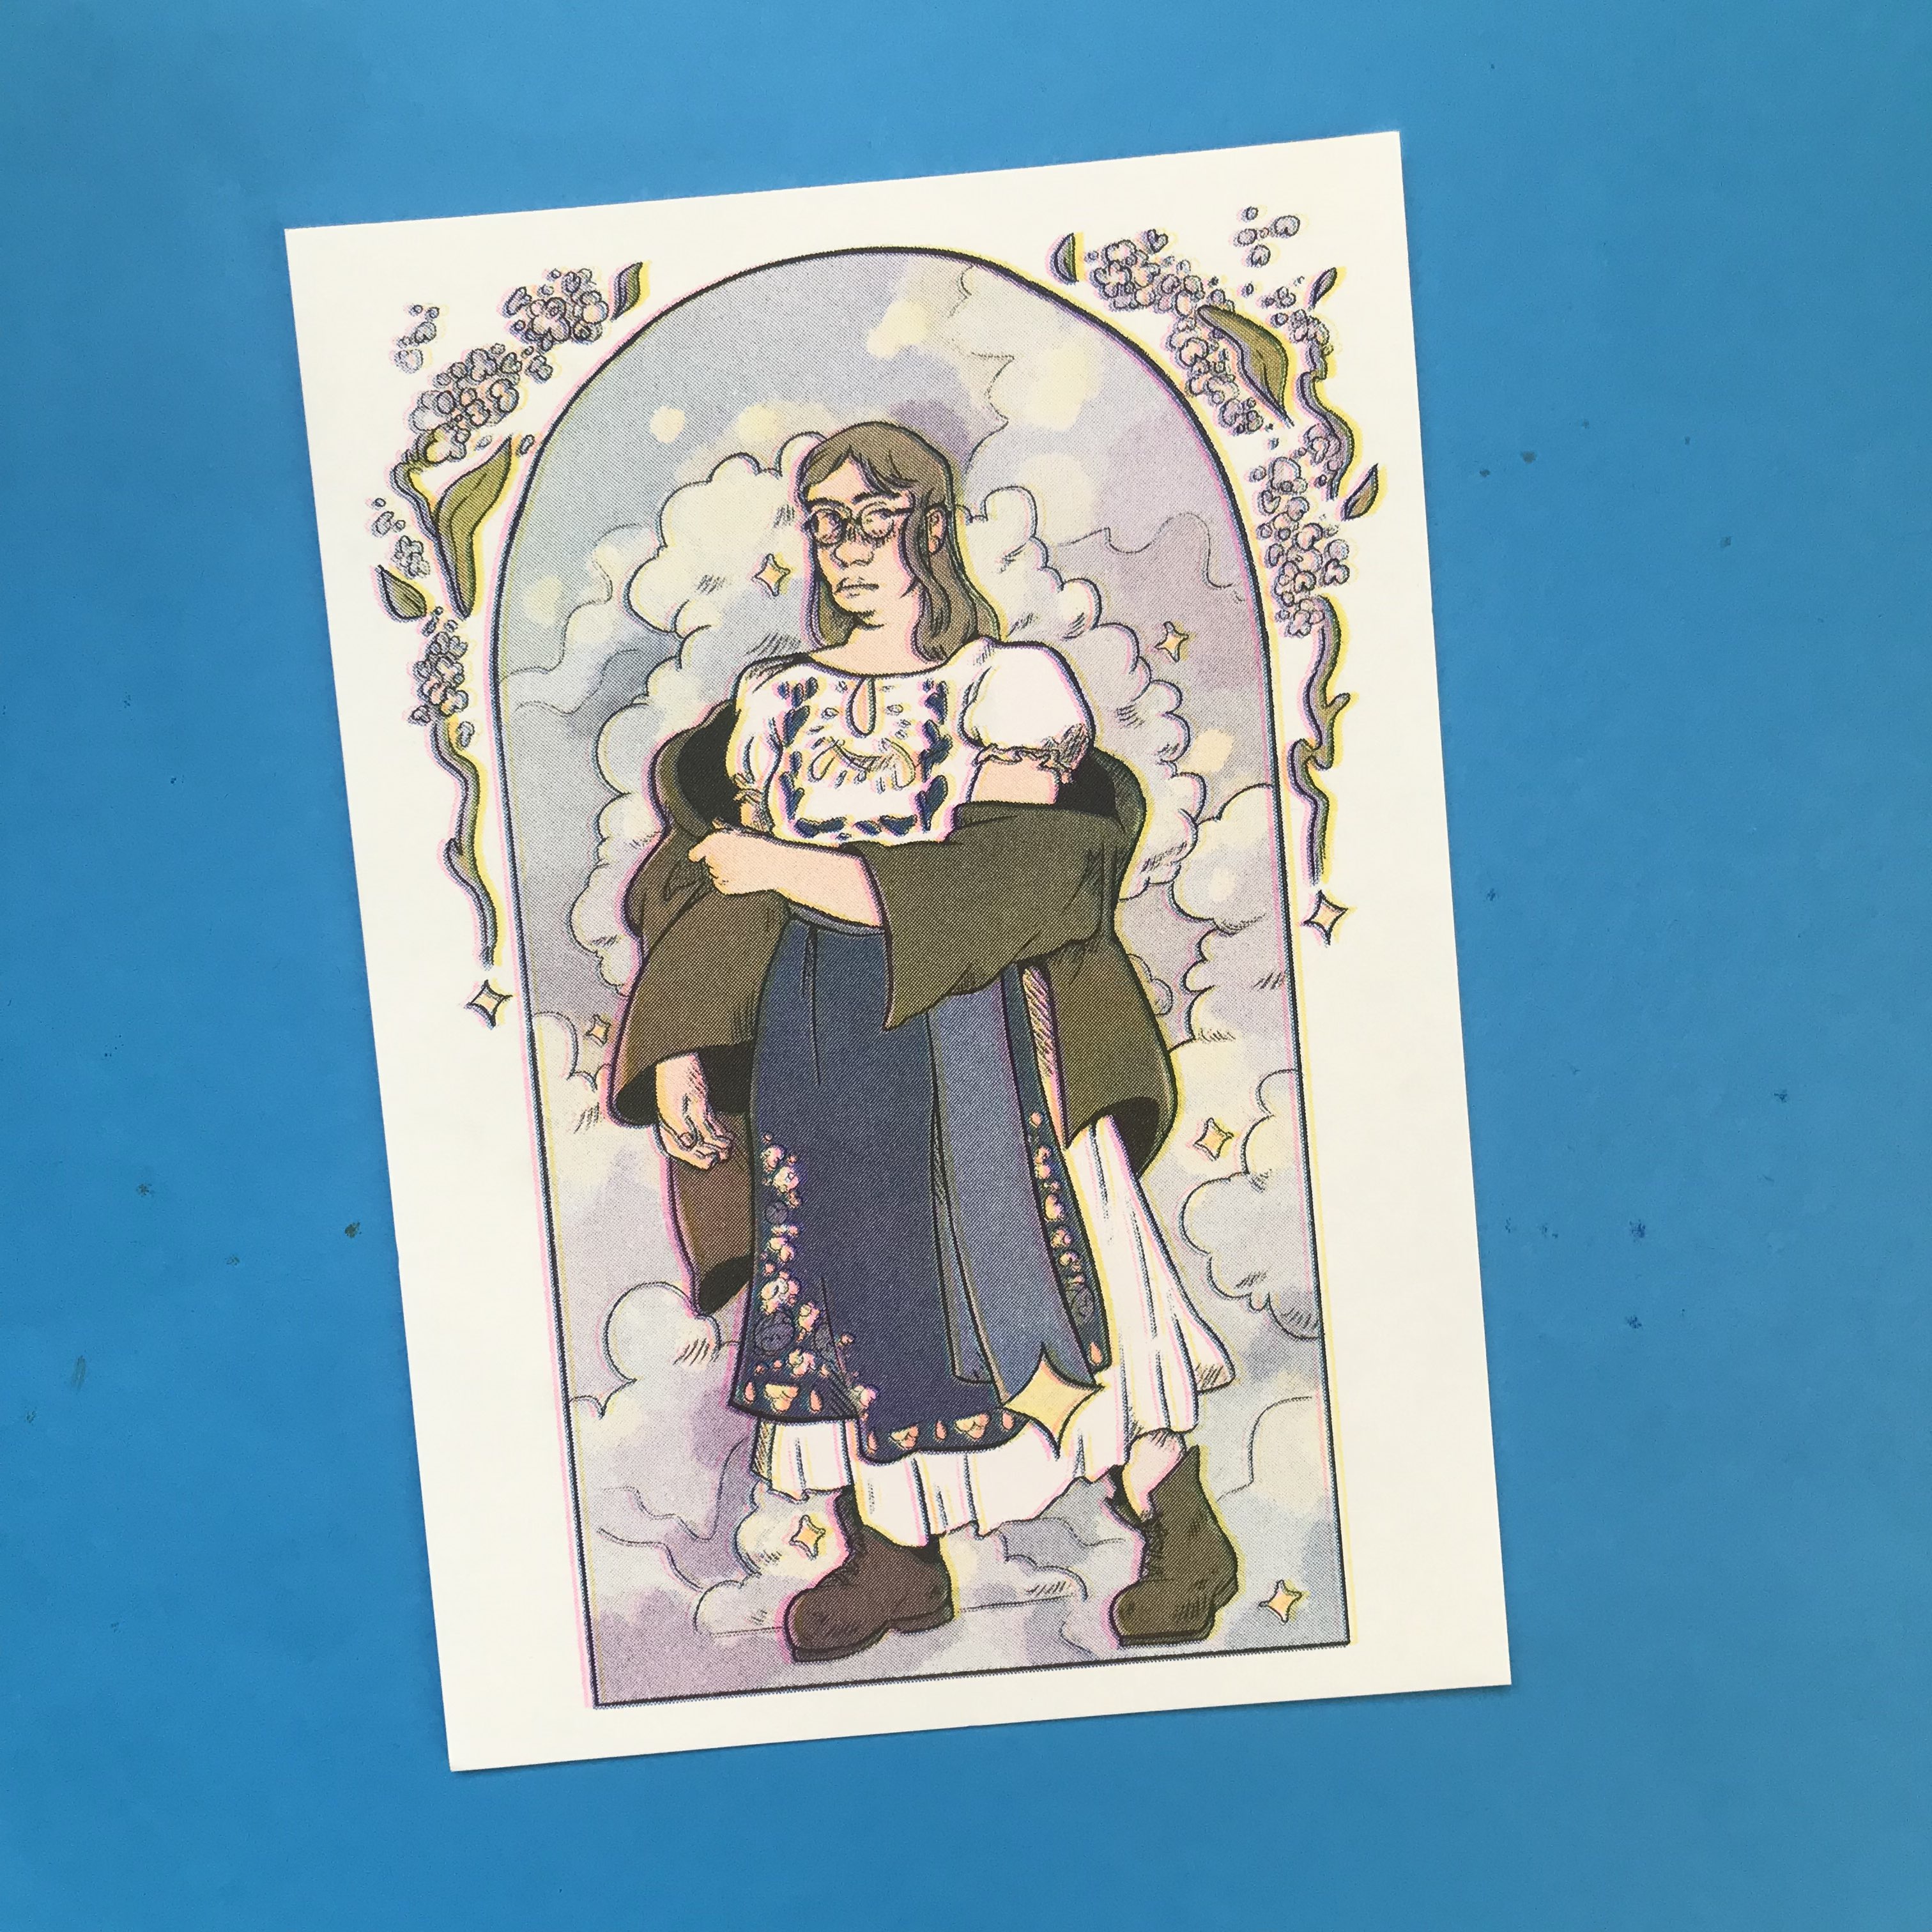 A photo of a full-colour CMYK risoprint against a blue background. The print is an illustration of a young White woman in traditional Eastern European-inspired folk dress in blue and an oversized brown jacket. Behind her is a arch frame full of blue clouds, with details of stars and flowers on the edge of the frame.